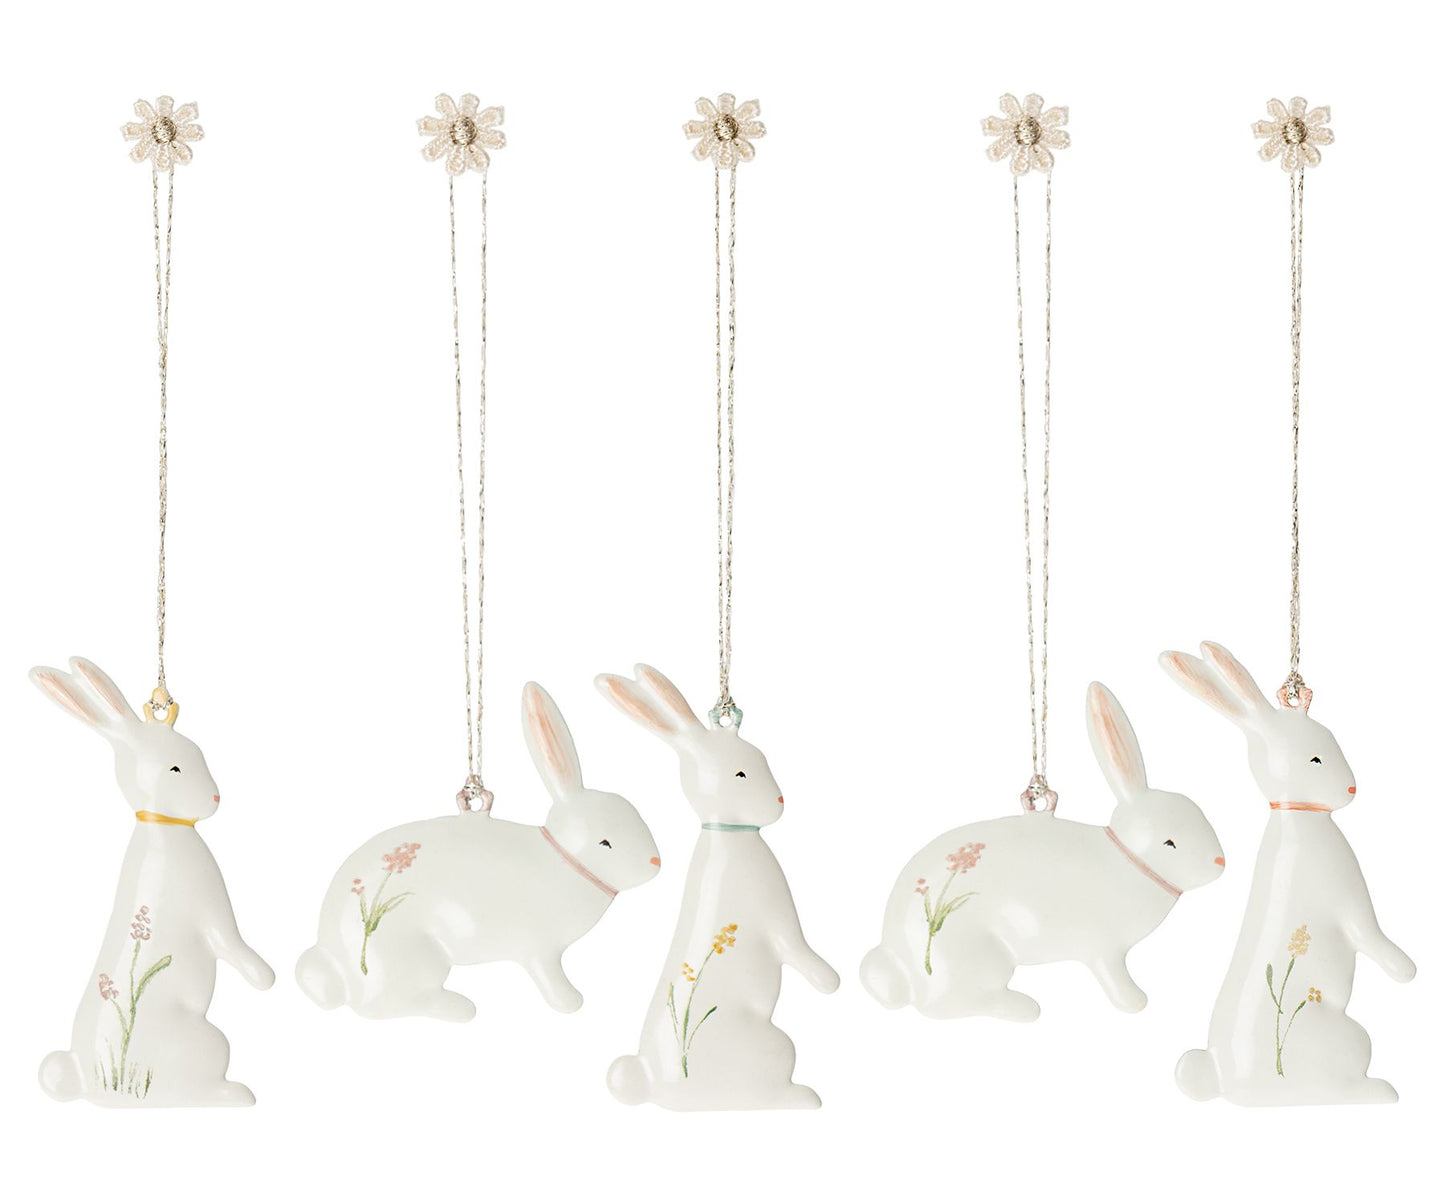 Maileg Easter Bunny Ornaments in Box - 5 piece